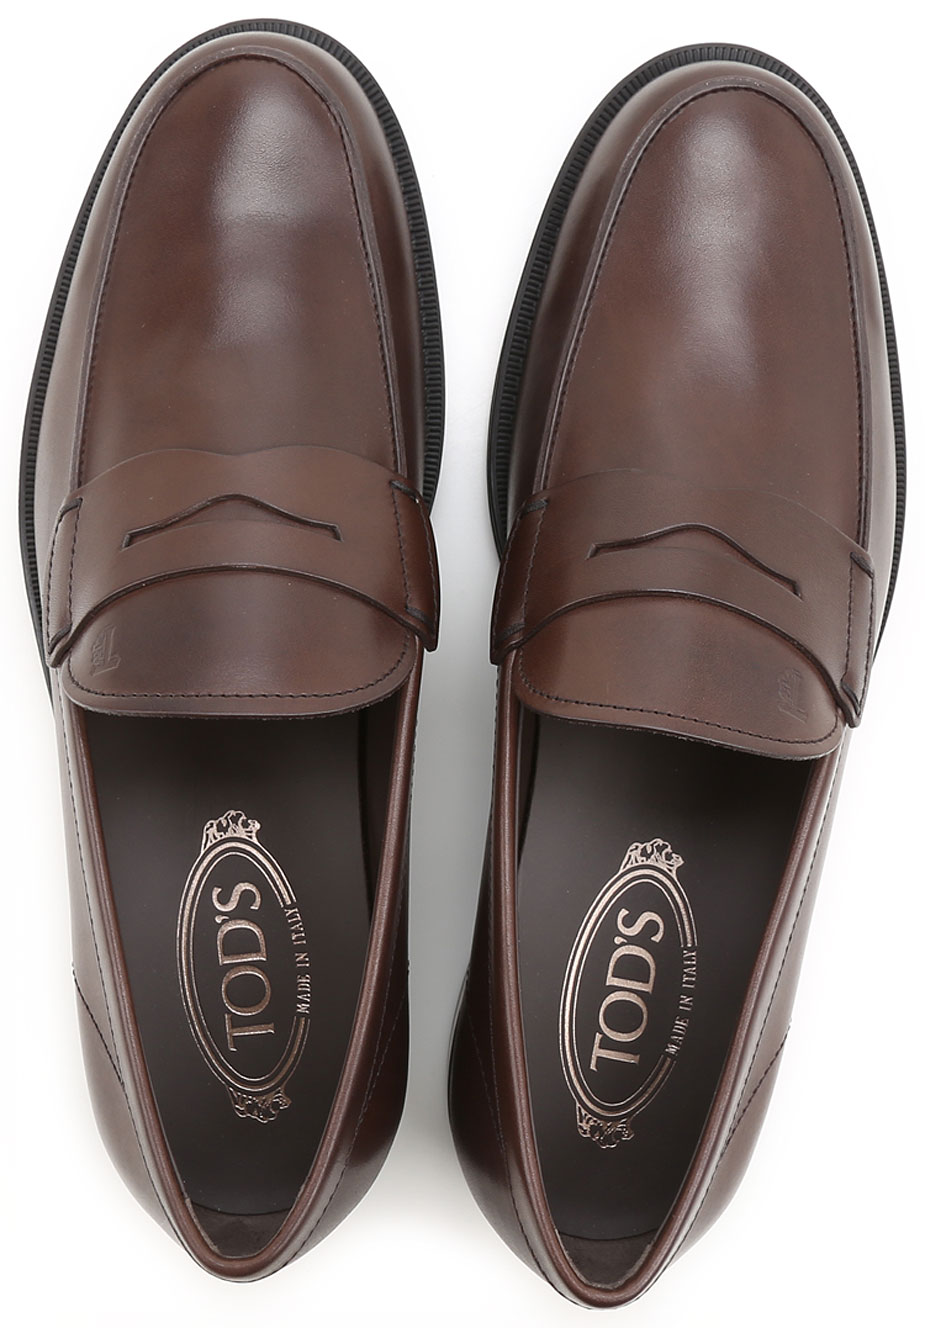 Mens Shoes Tods, Style code: xxm0ud00640d90s800--